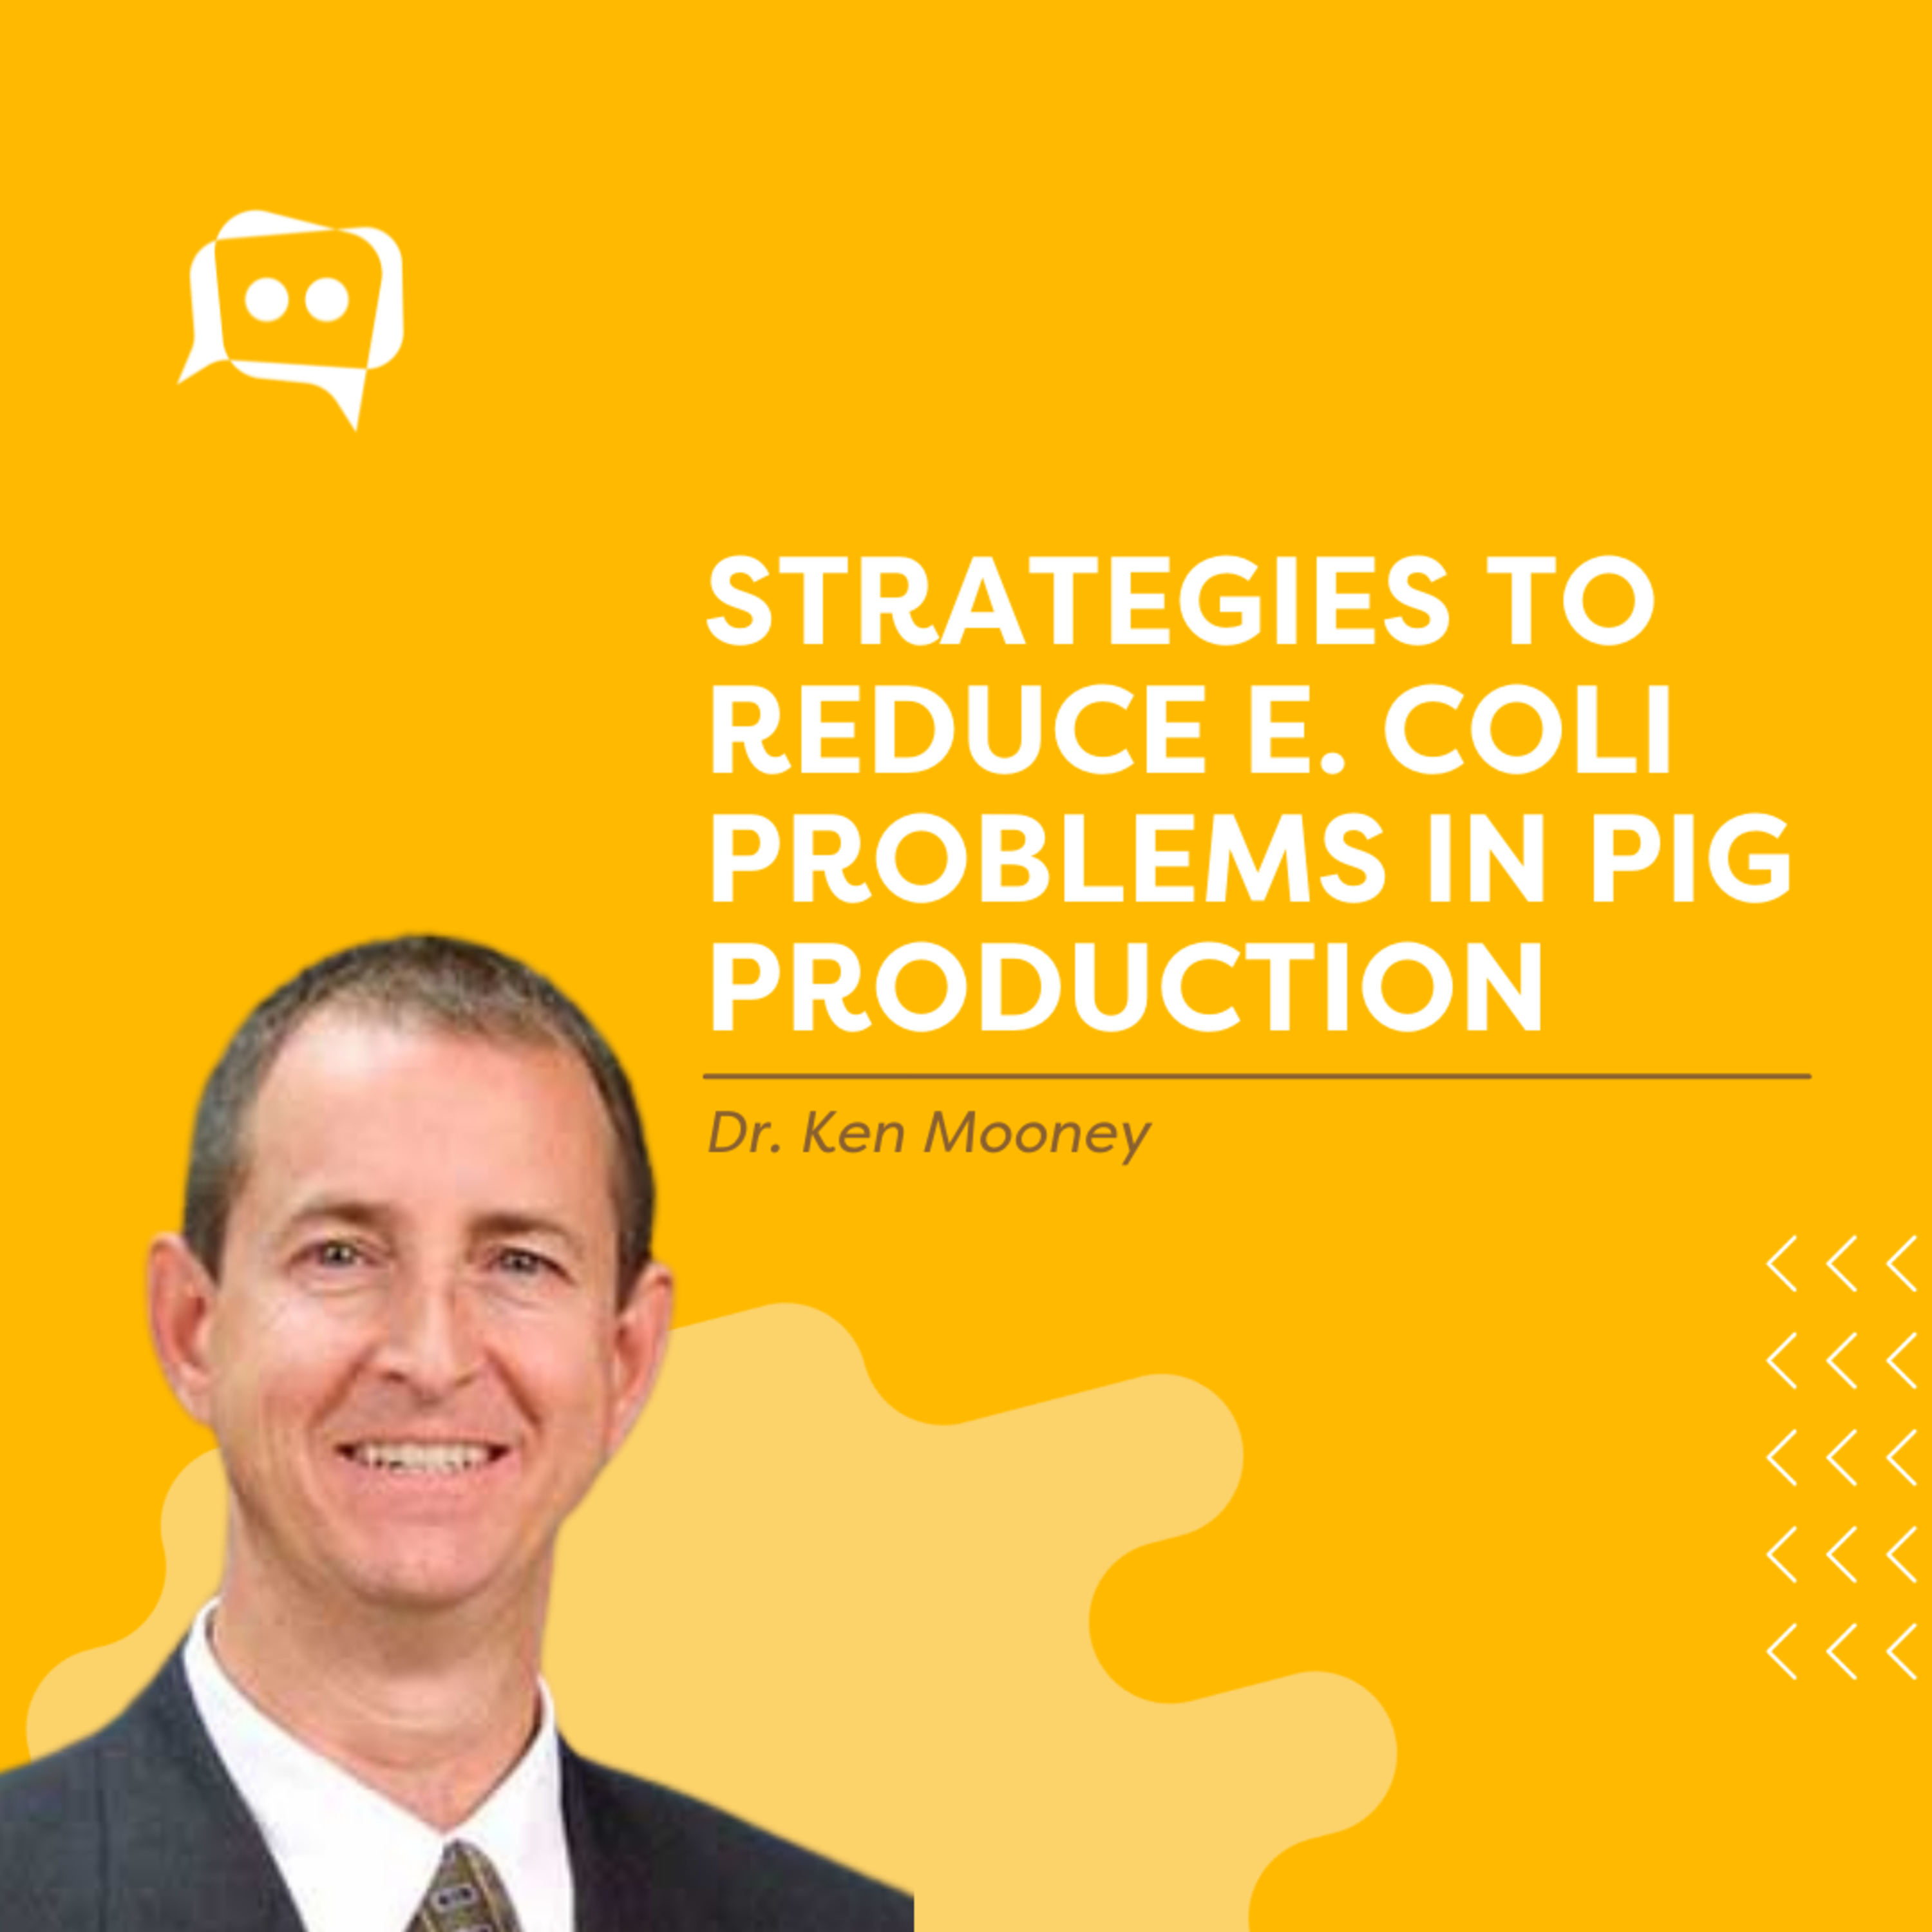 #SHORTS: Strategies to reduce E. coli problems in pig production, with Dr. Ken Mooney